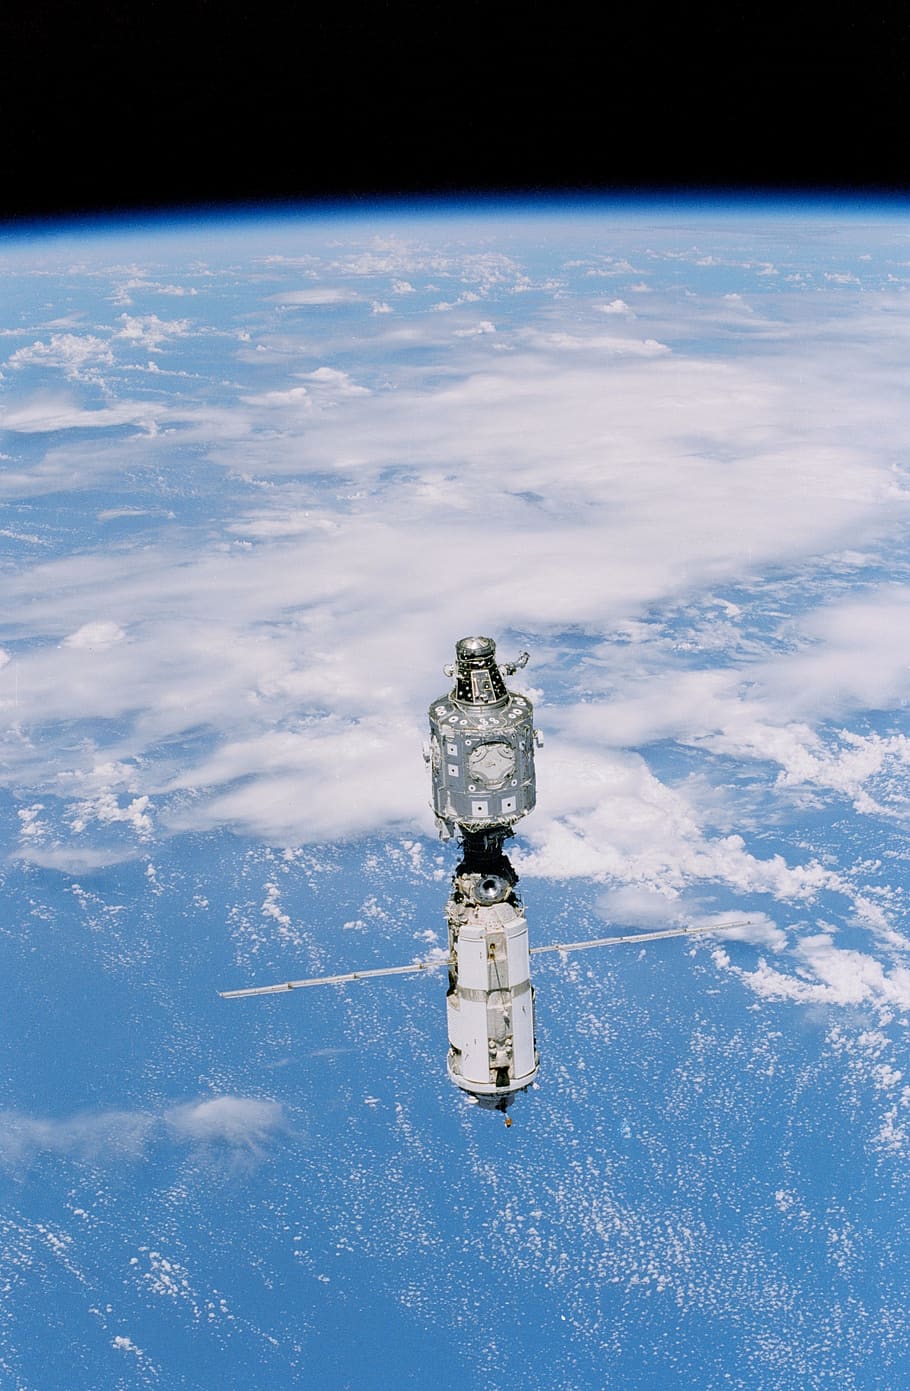 international space station, iss, astronauts, earth, spacecraft, vehicle, transportation, mission, cosmos, black